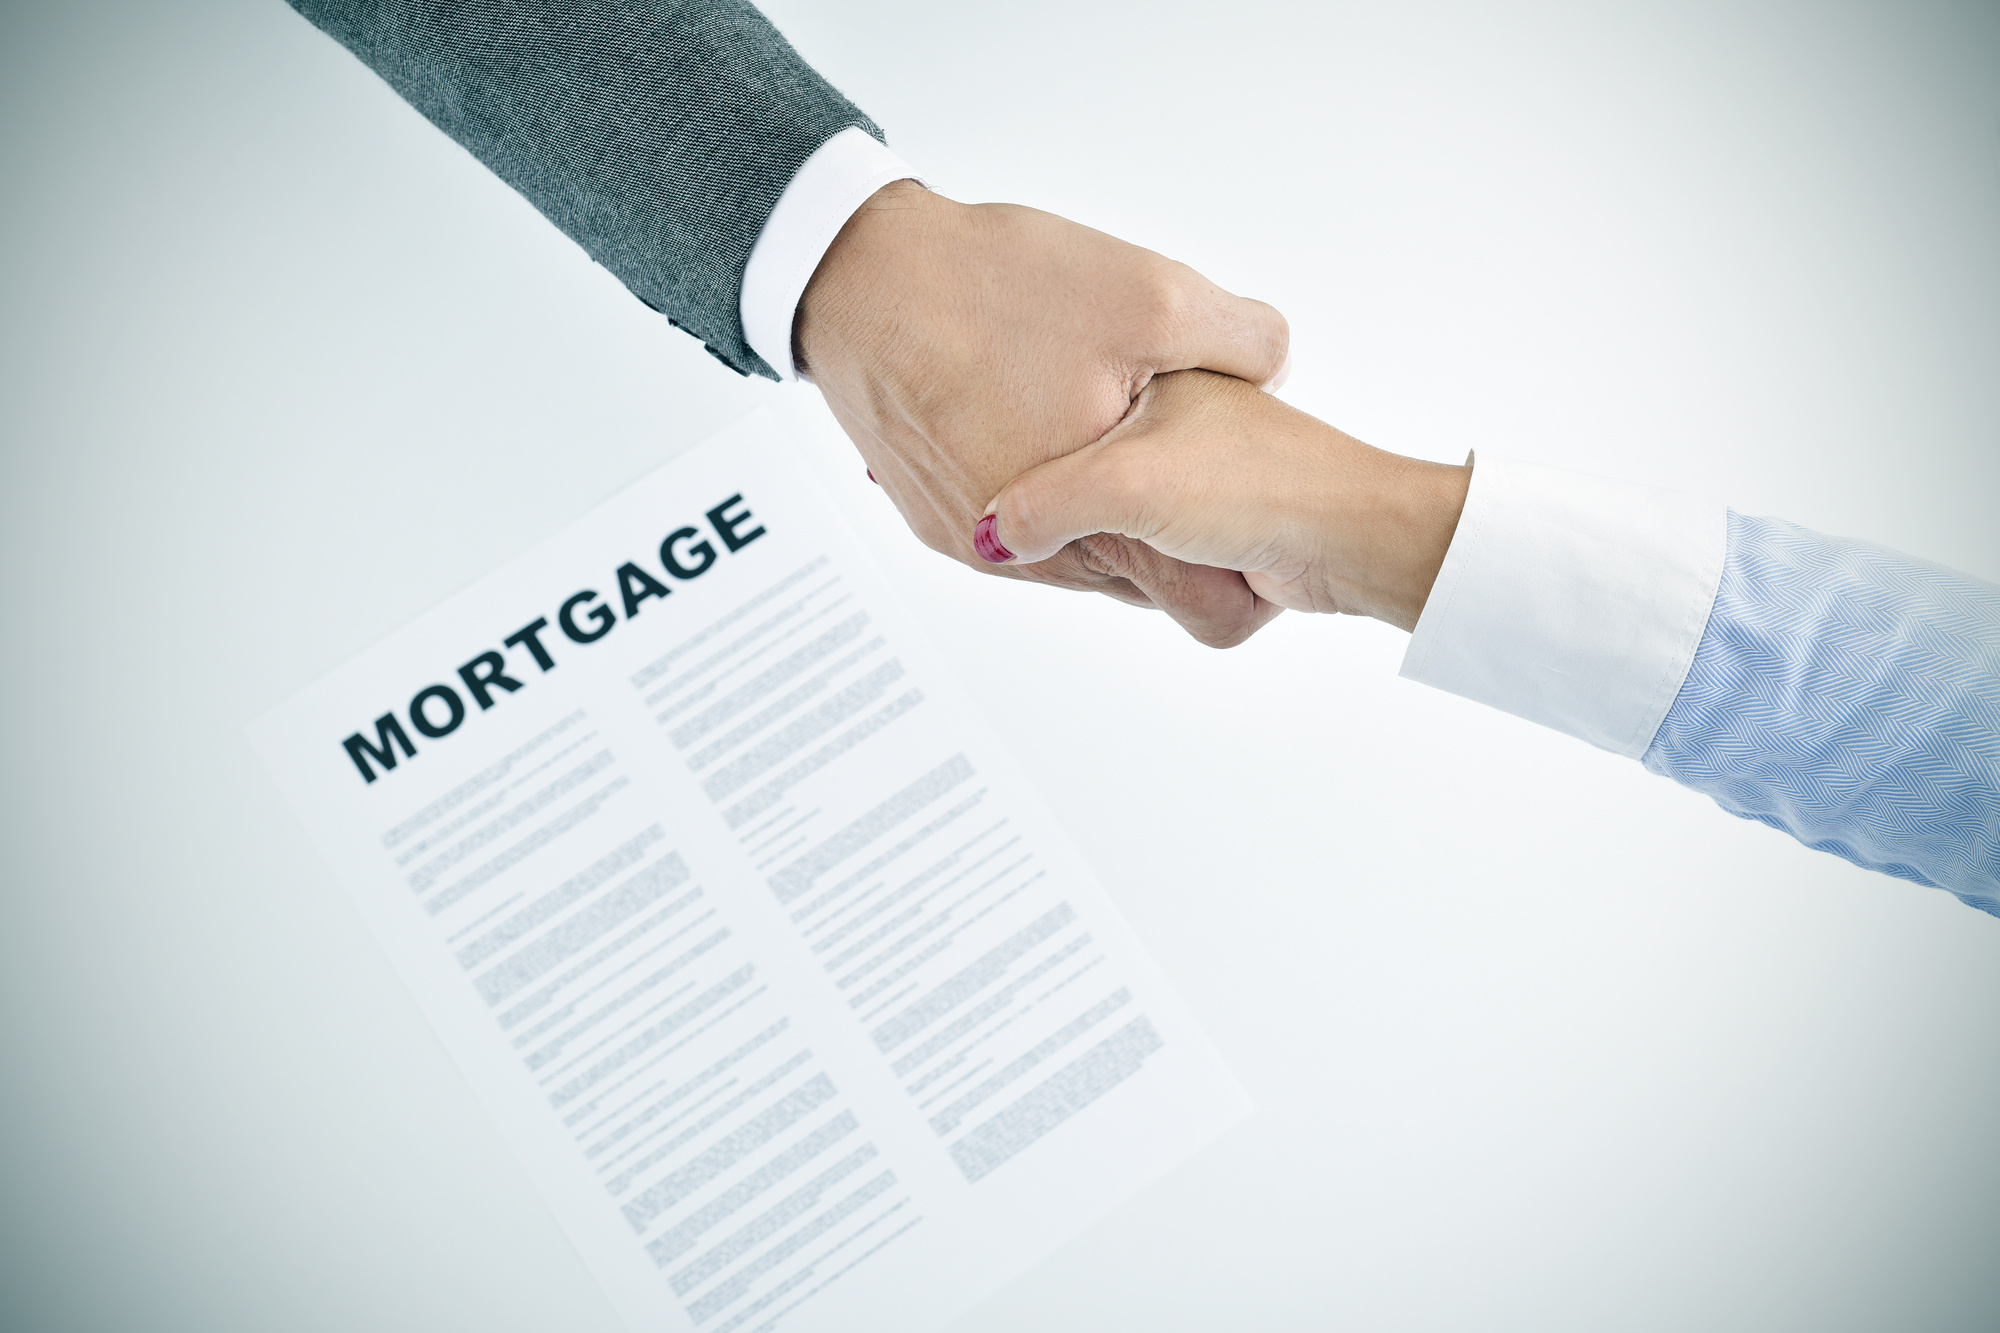 How to Select Mortgage Lenders: Everything You Need to Know